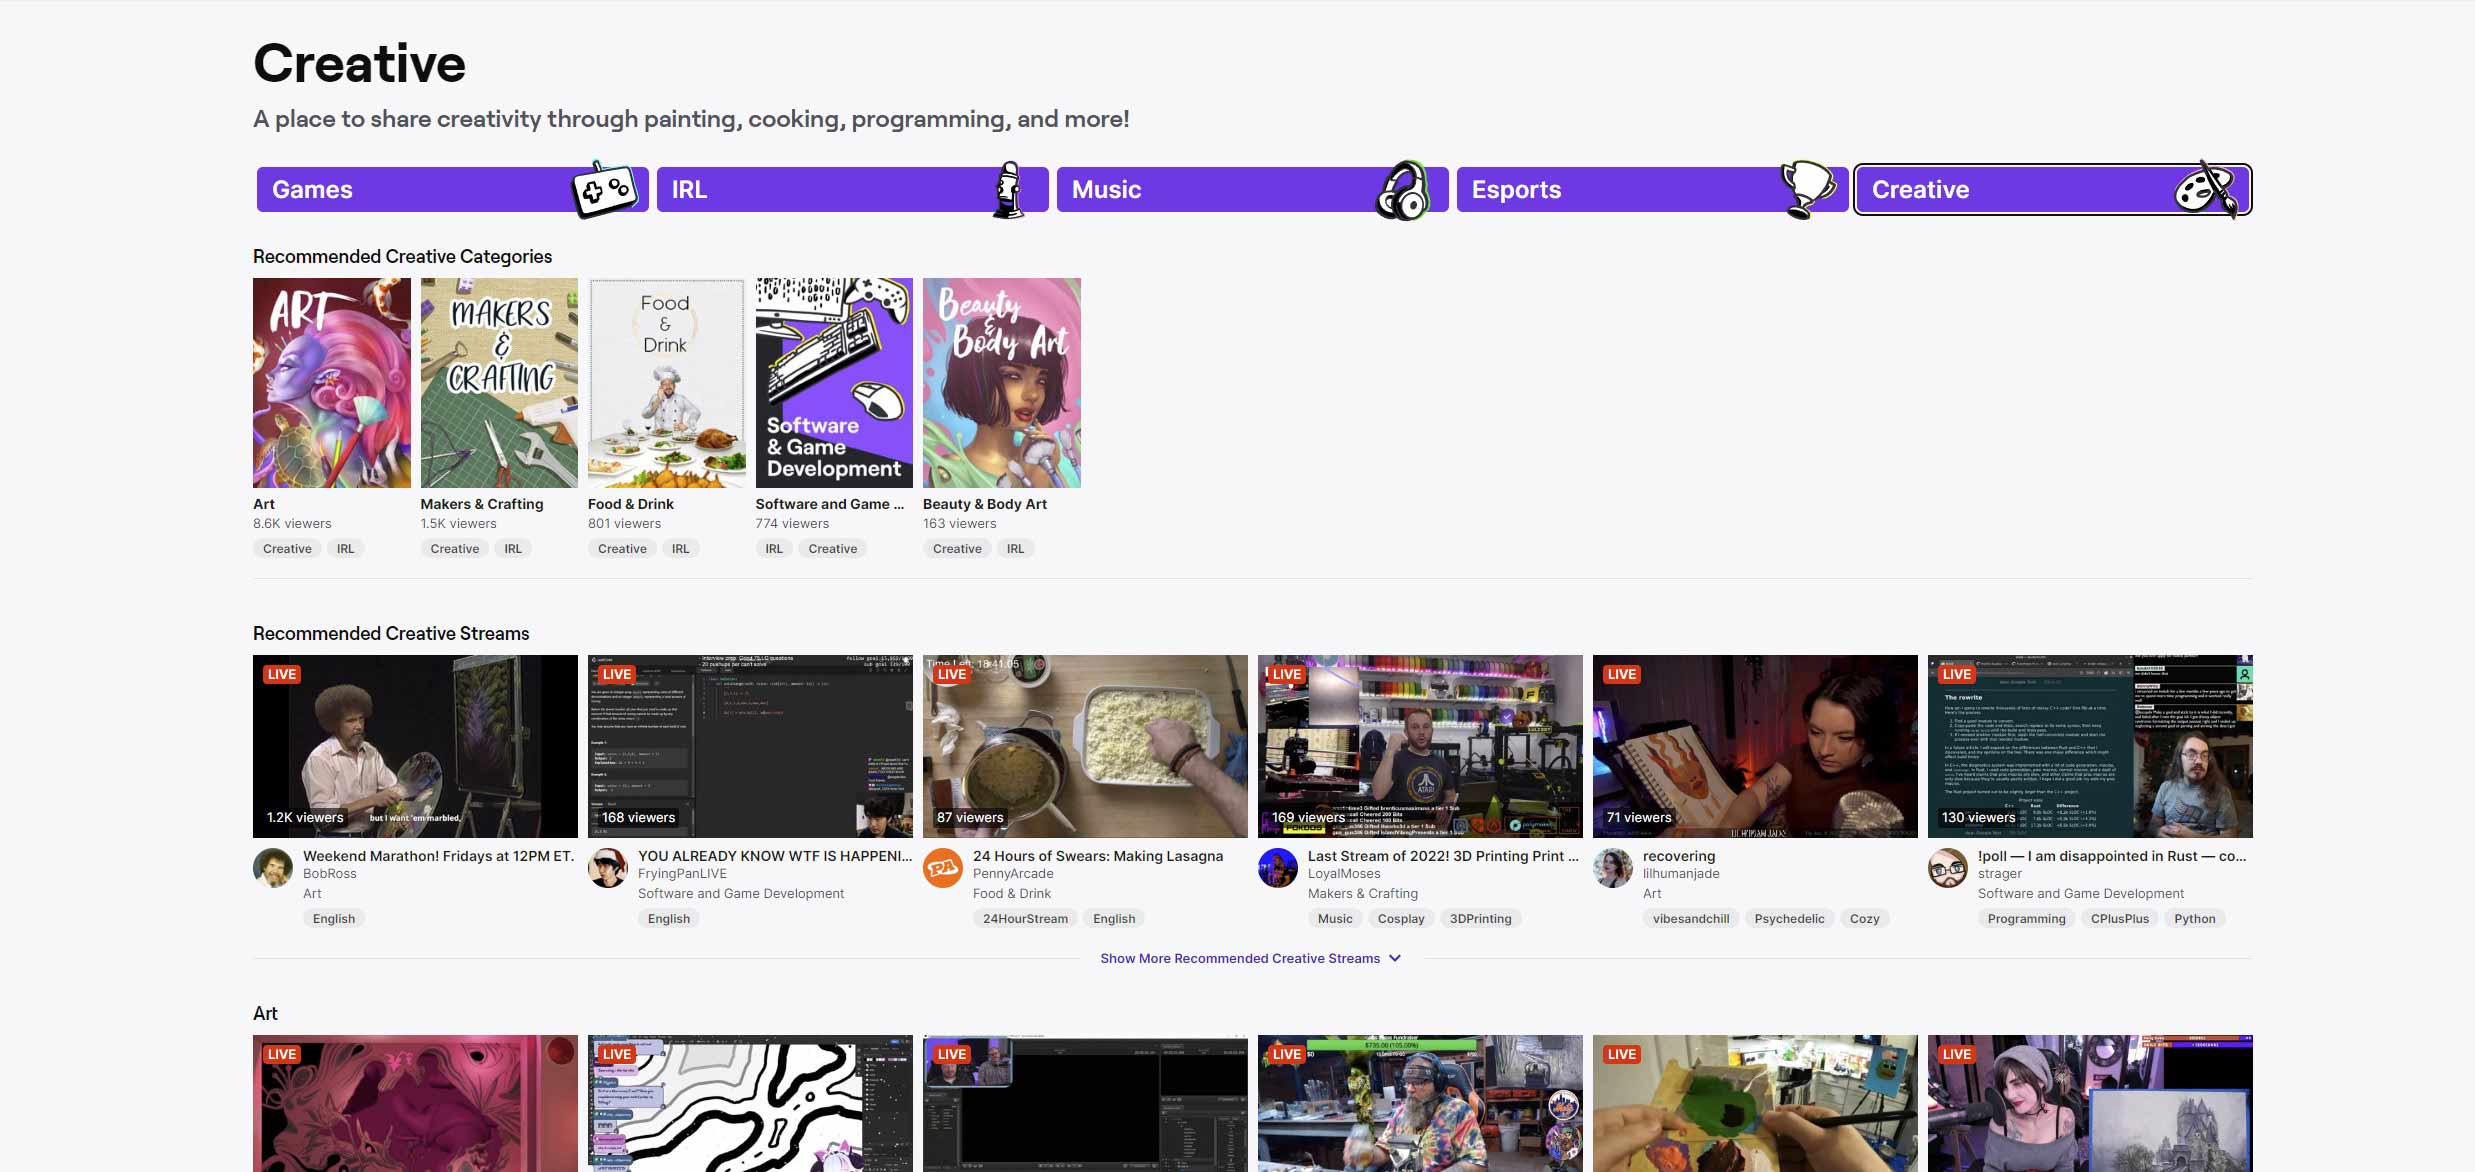 Creative Section on Twitch